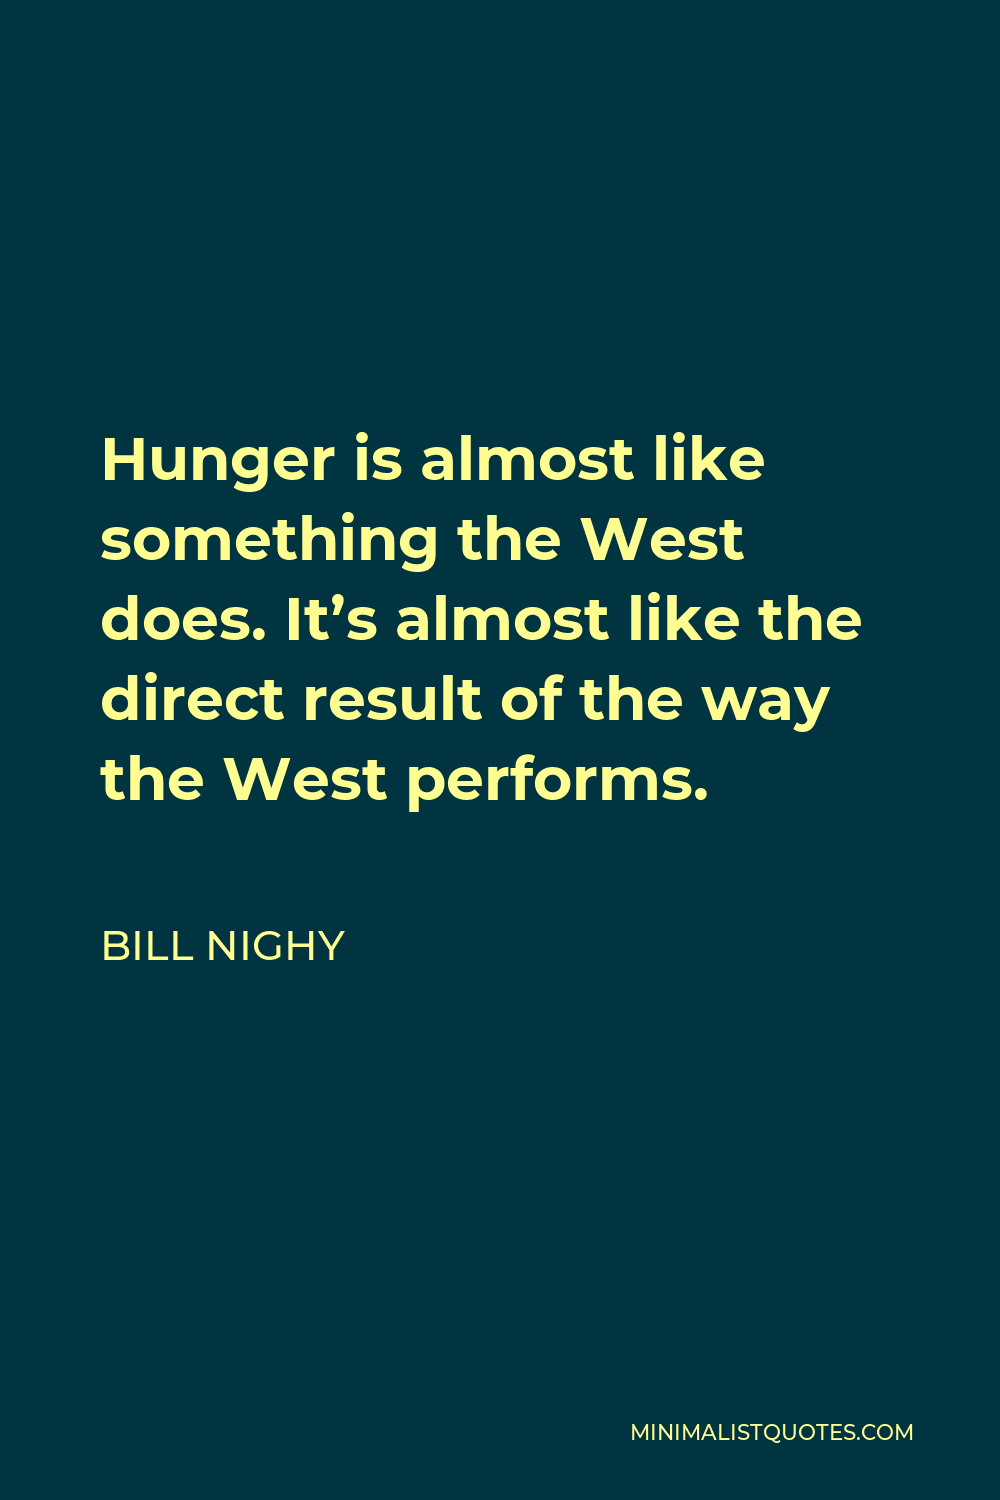 Bill Nighy Quote - Hunger is almost like something the West does. It’s almost like the direct result of the way the West performs.